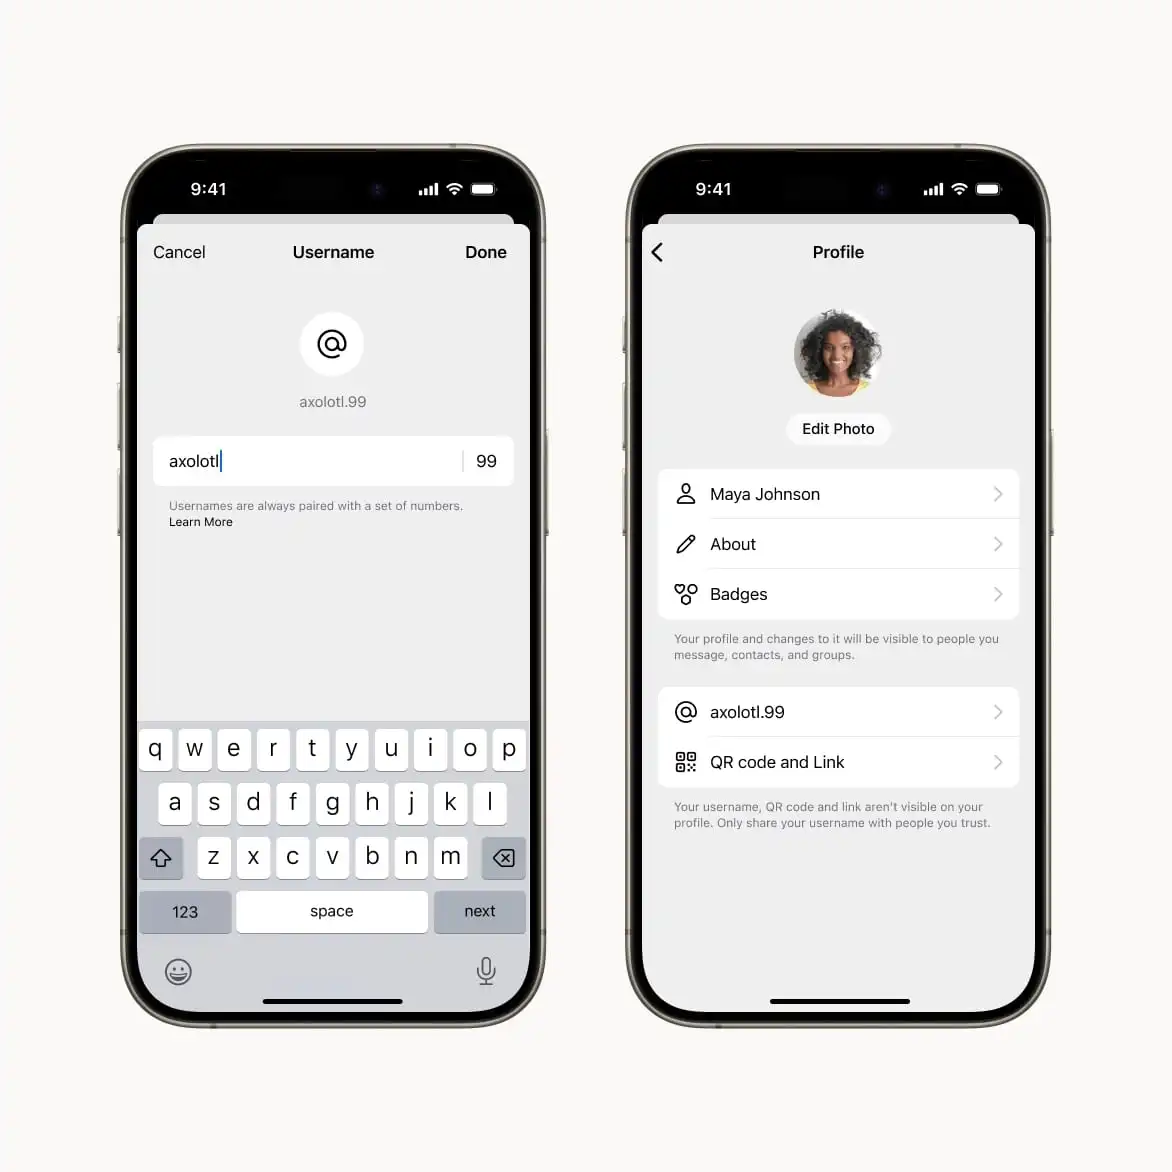 Signal Introduces Usernames to Enhance Privacy